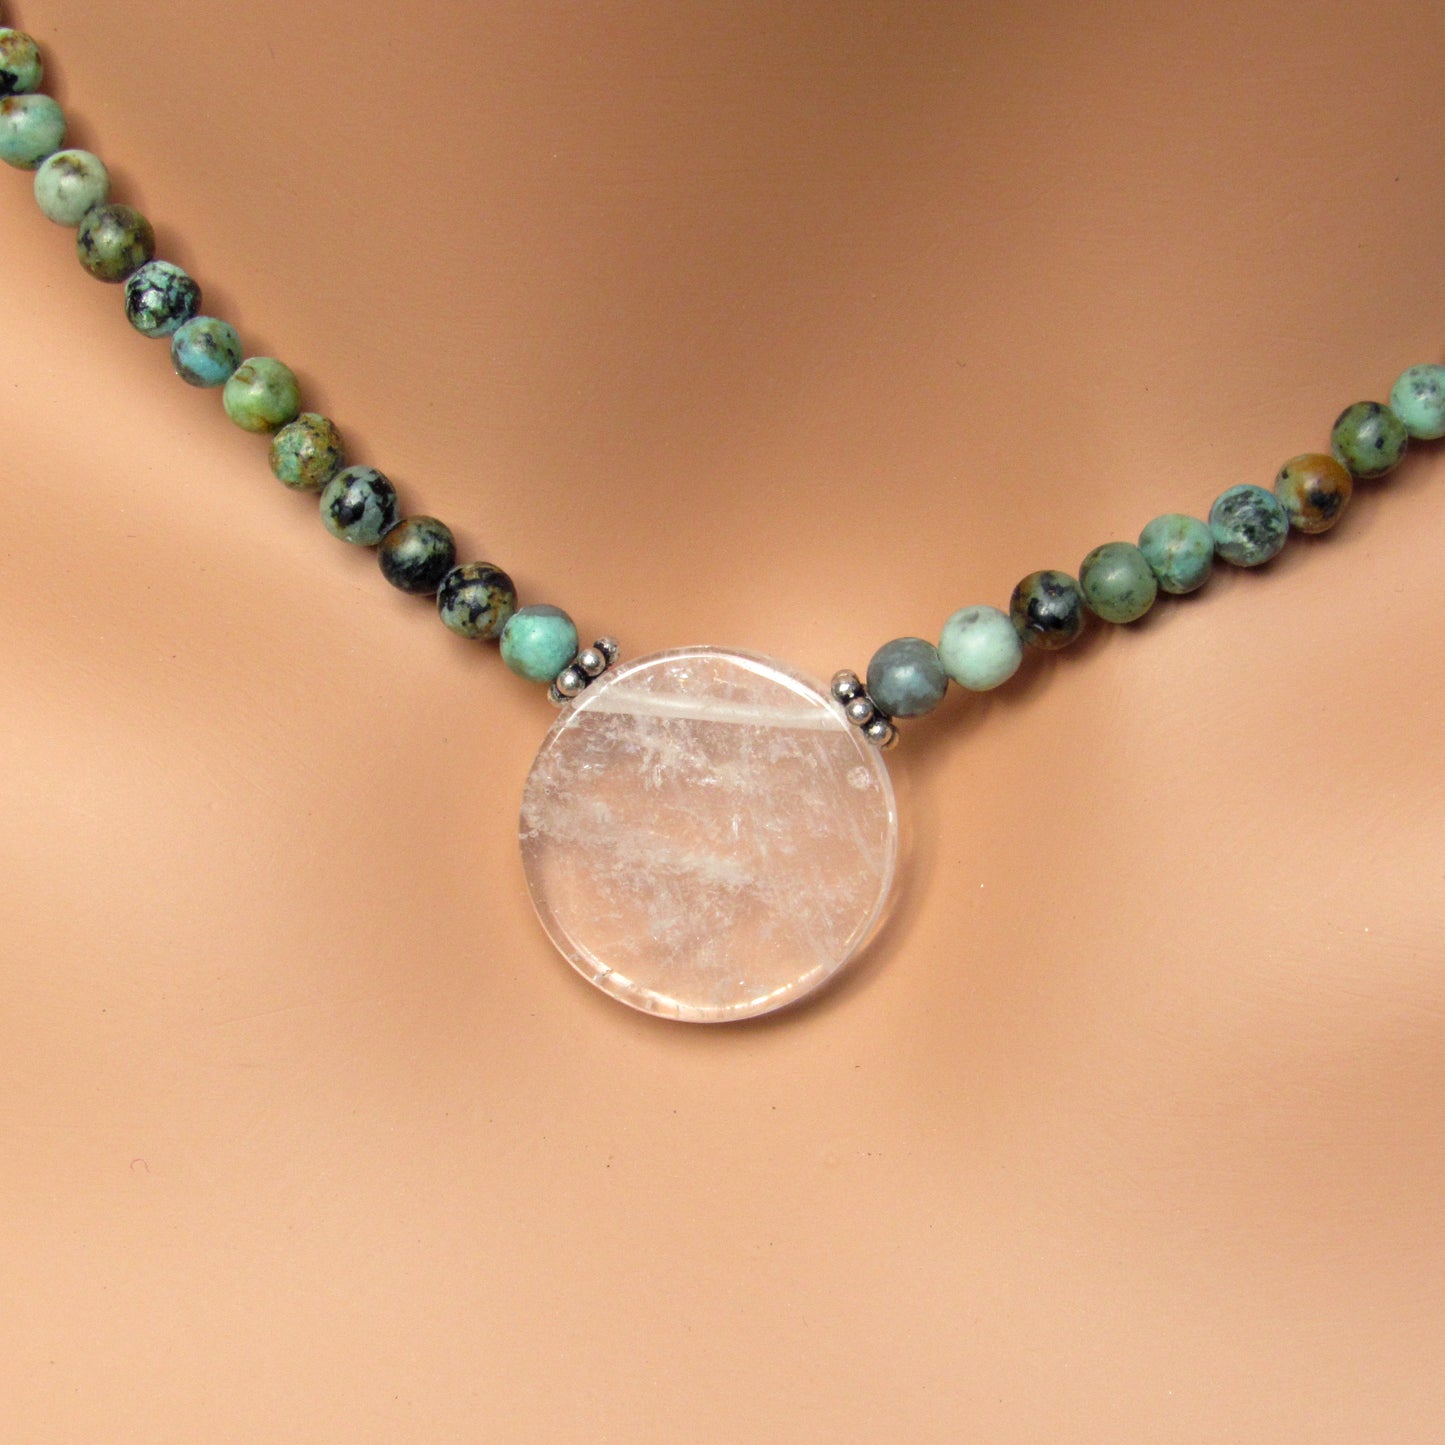 African Turquoise Gemstones with Clear Quartz Disk Pendant and Sterling Silver